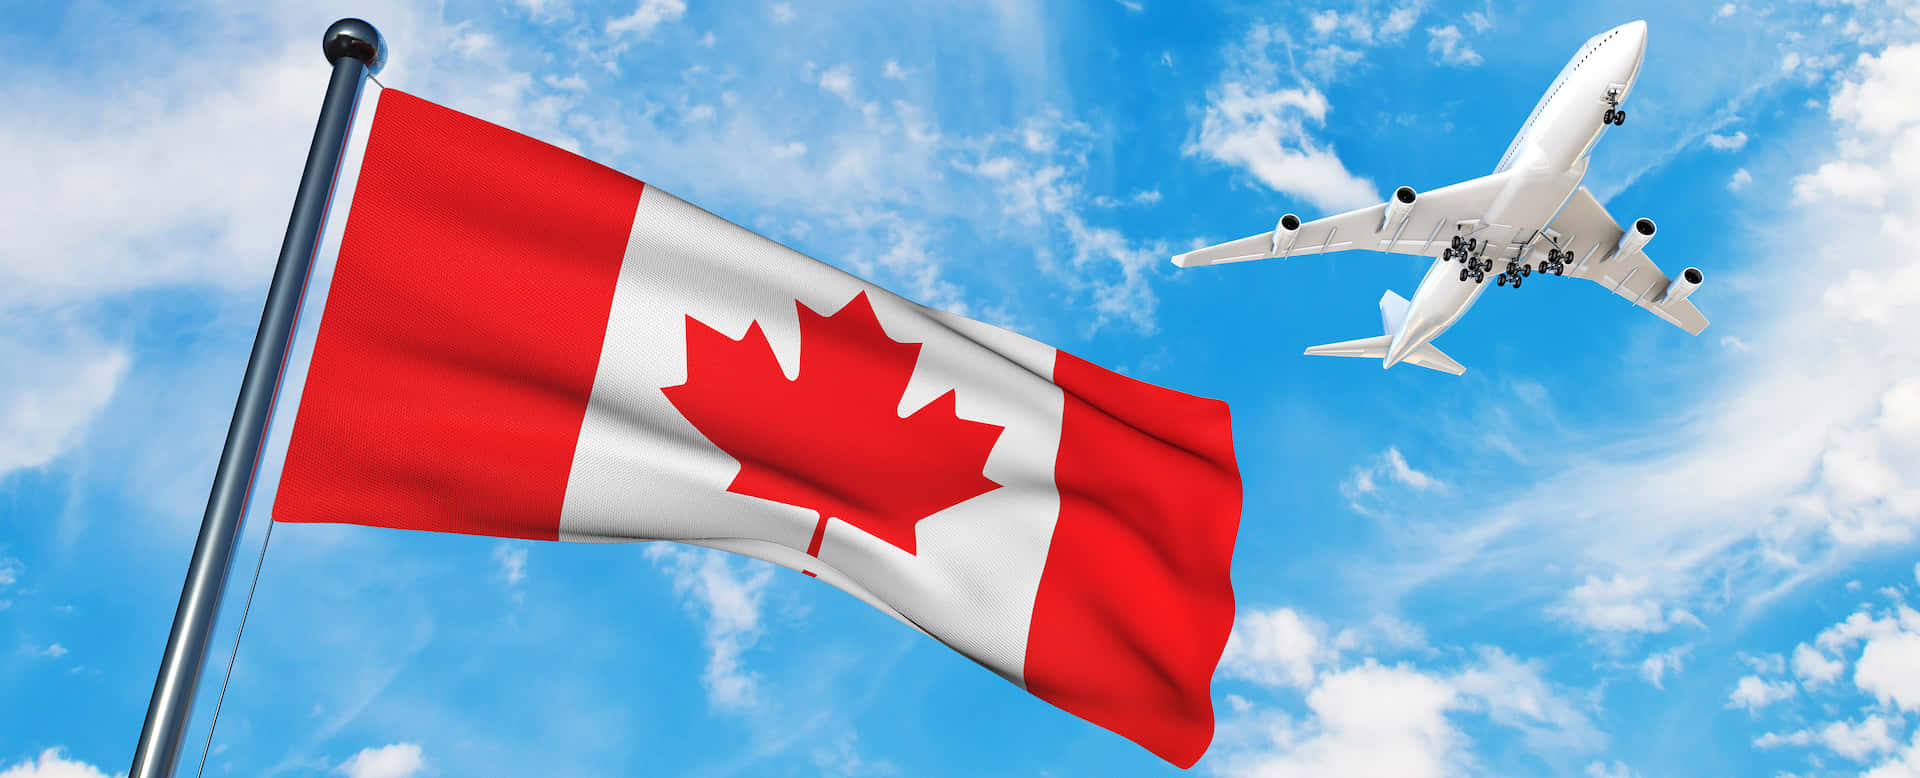 Canadian Flagand Airplane Wallpaper